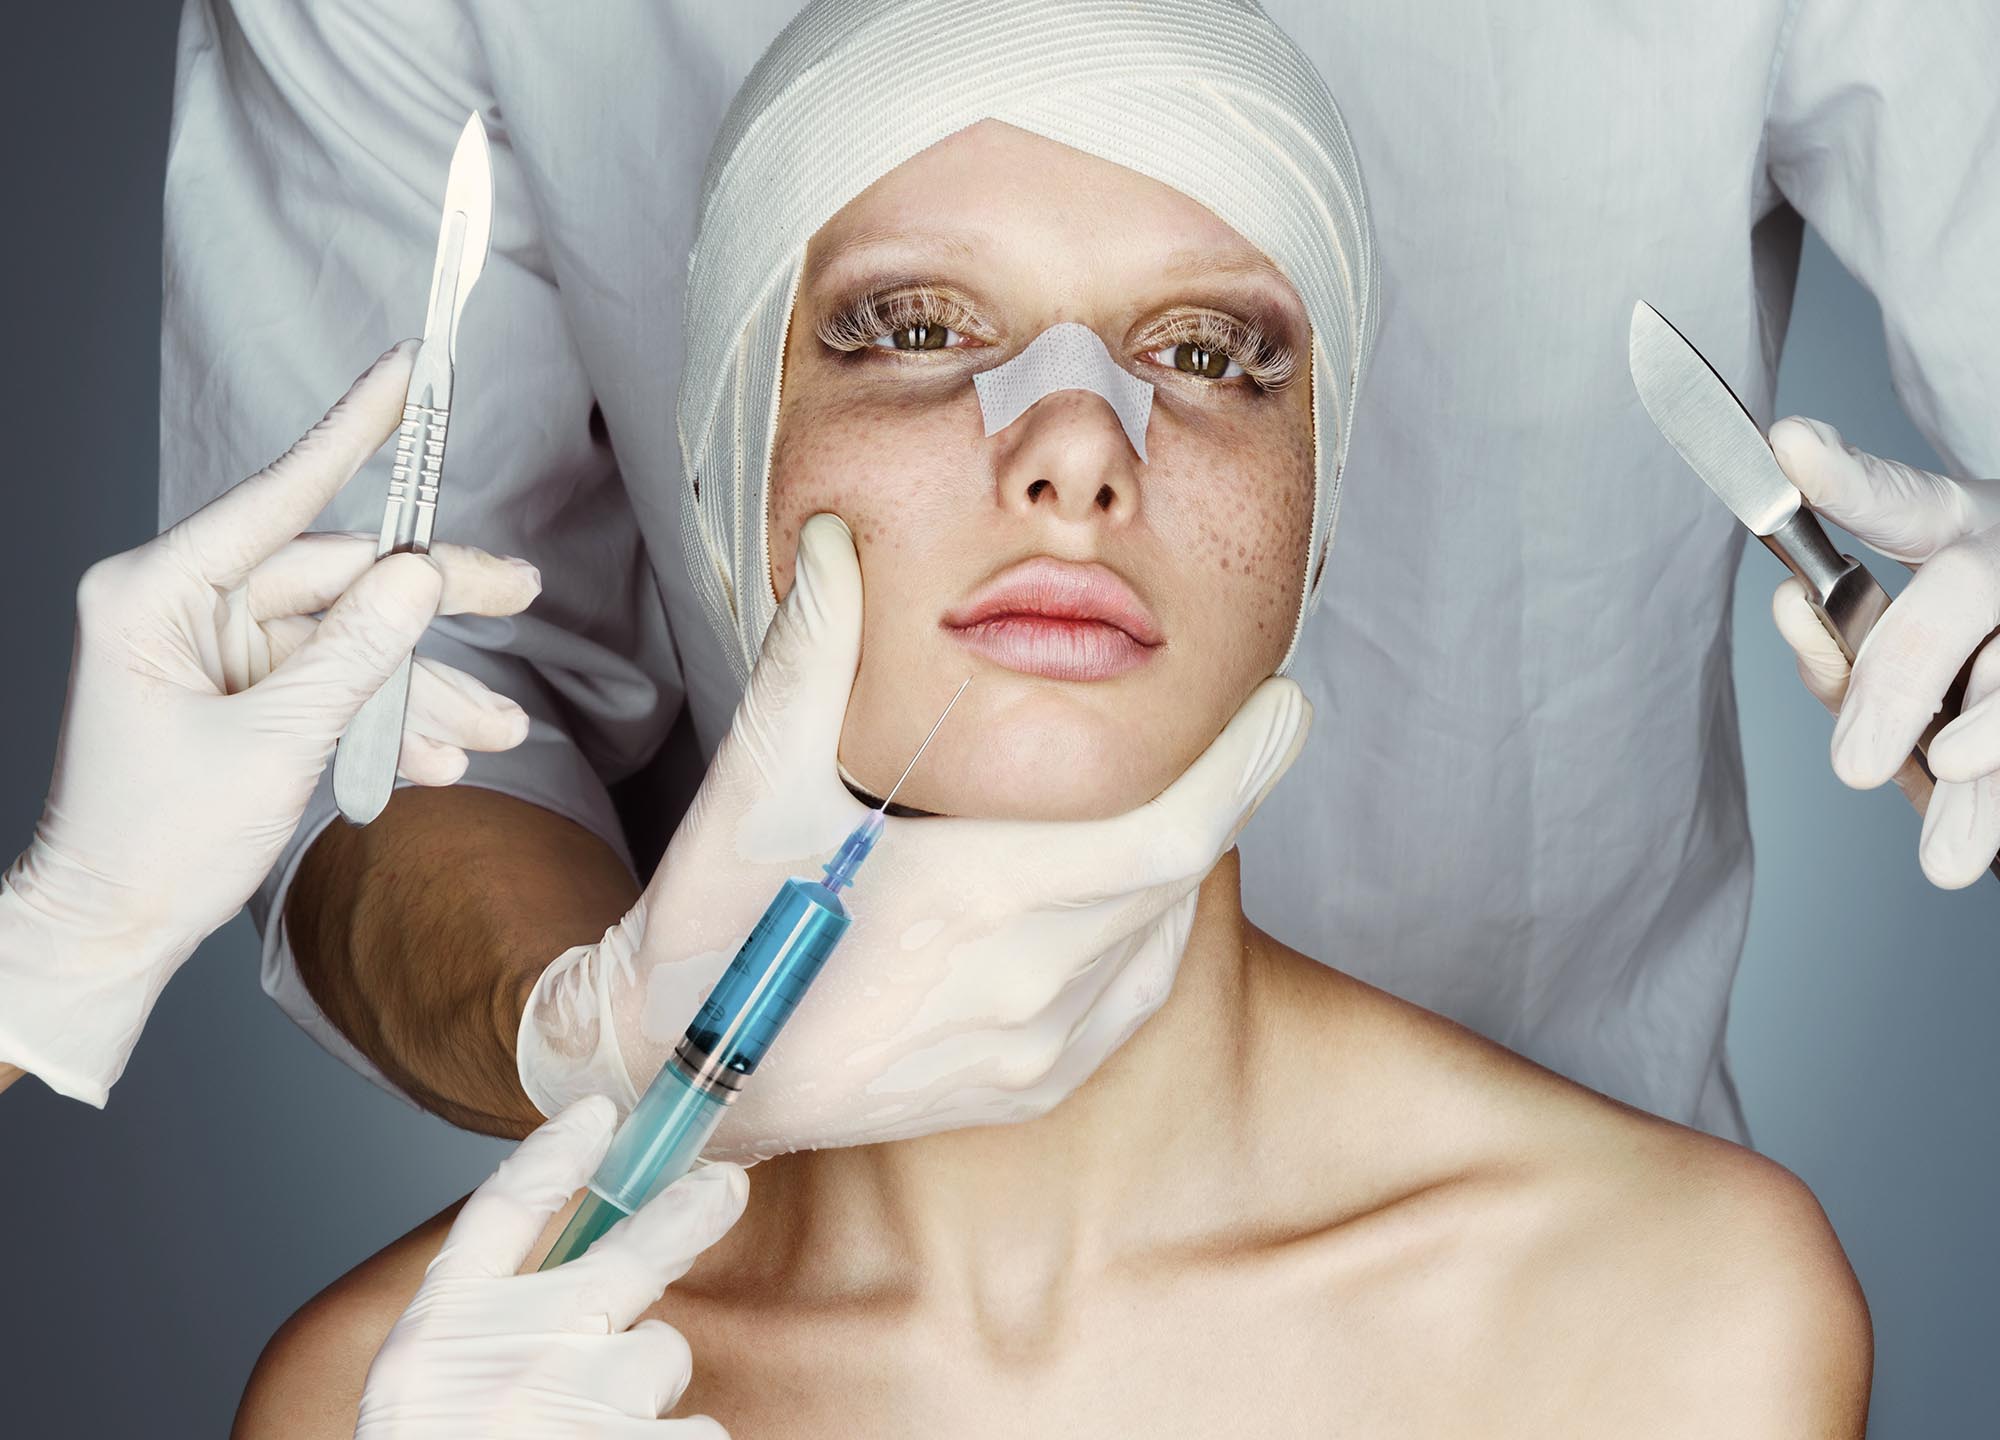 Here's All You Need To Know About Plastic Surgeries